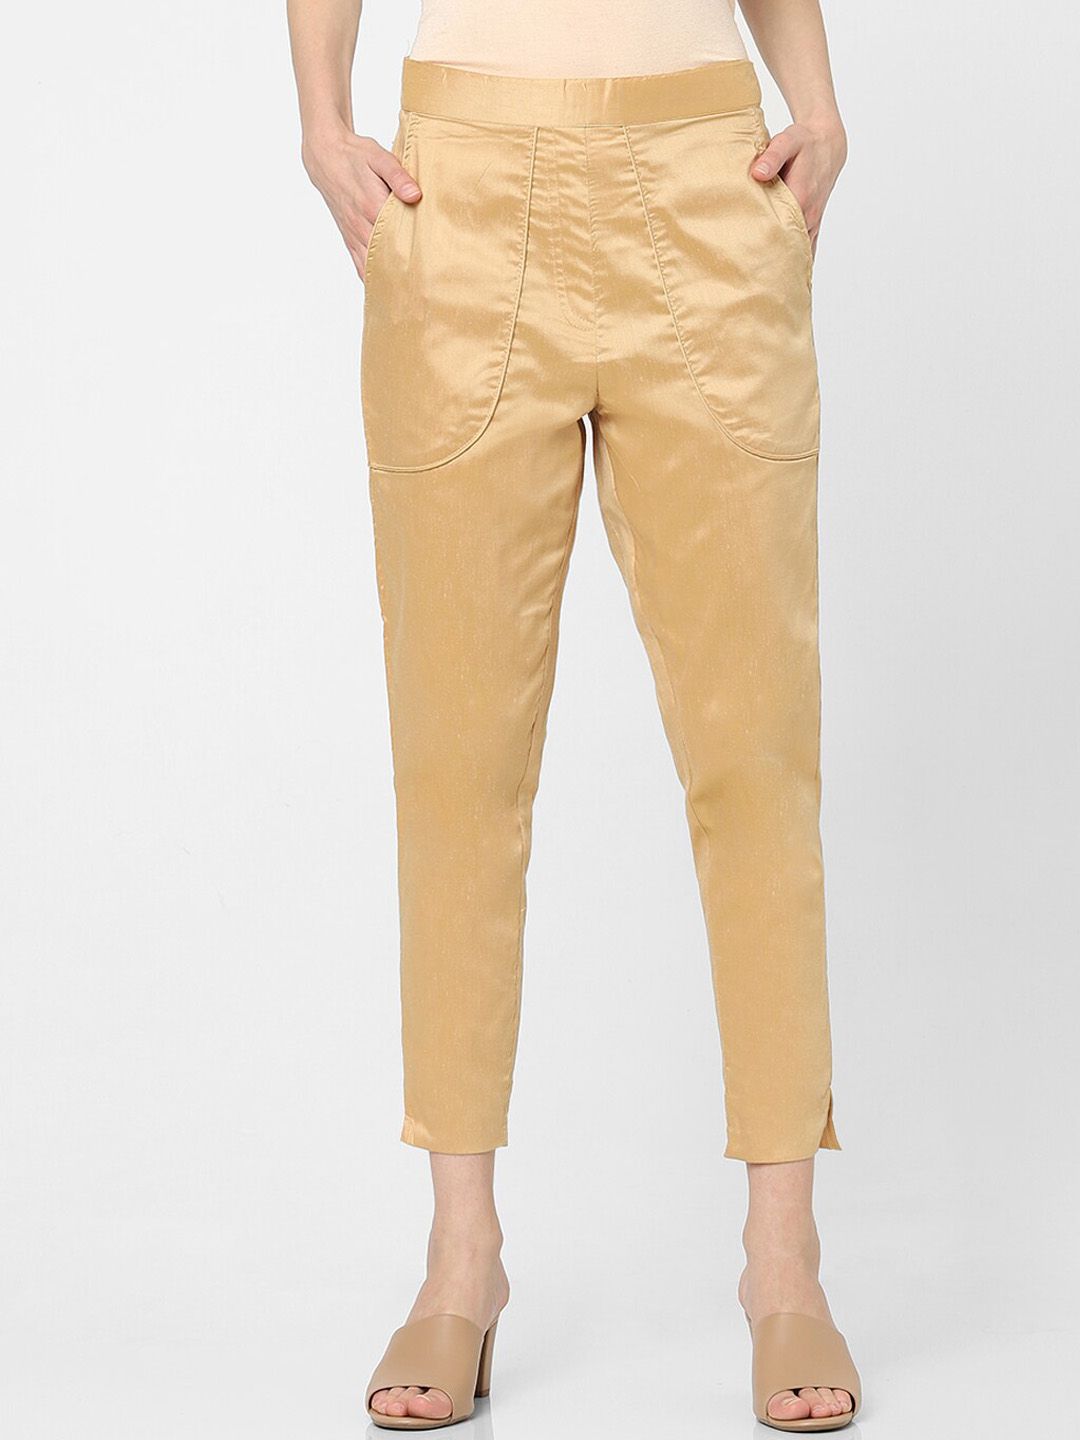 Gold Solid Trousers